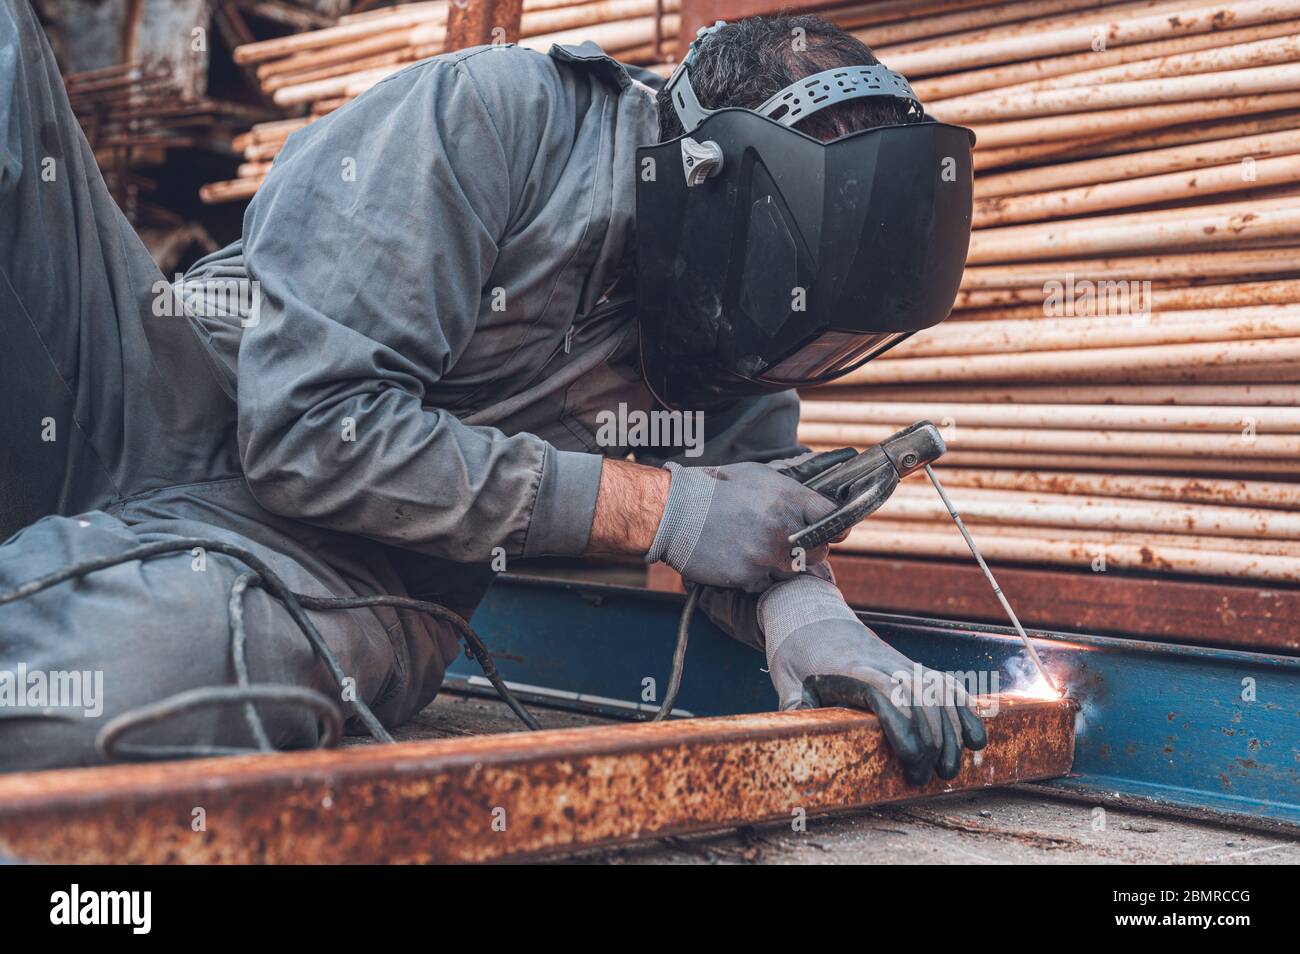 Welding work, Man Welding in Workshop. Metalwork and Sparks. Construction and Industrial concept . Stock Photo